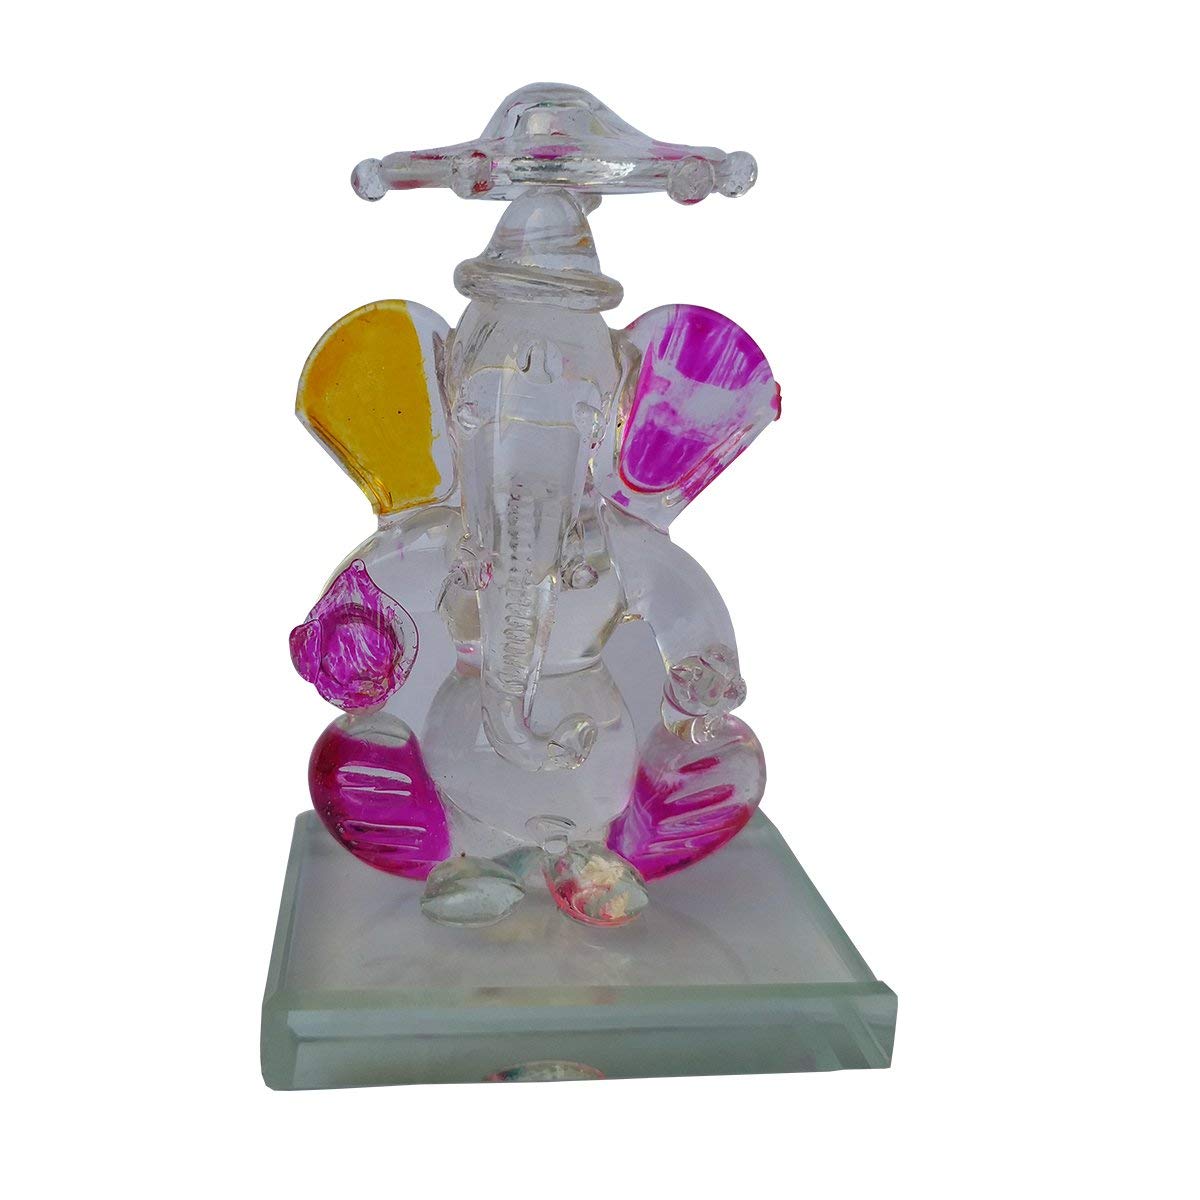 EthnicAlive-Ganesh-JEE-in-Crystal-Transparent-Pink-Colour-Religious-Gift-Vastu-Showpiece-Gift-Items-B075T32M24.jpg